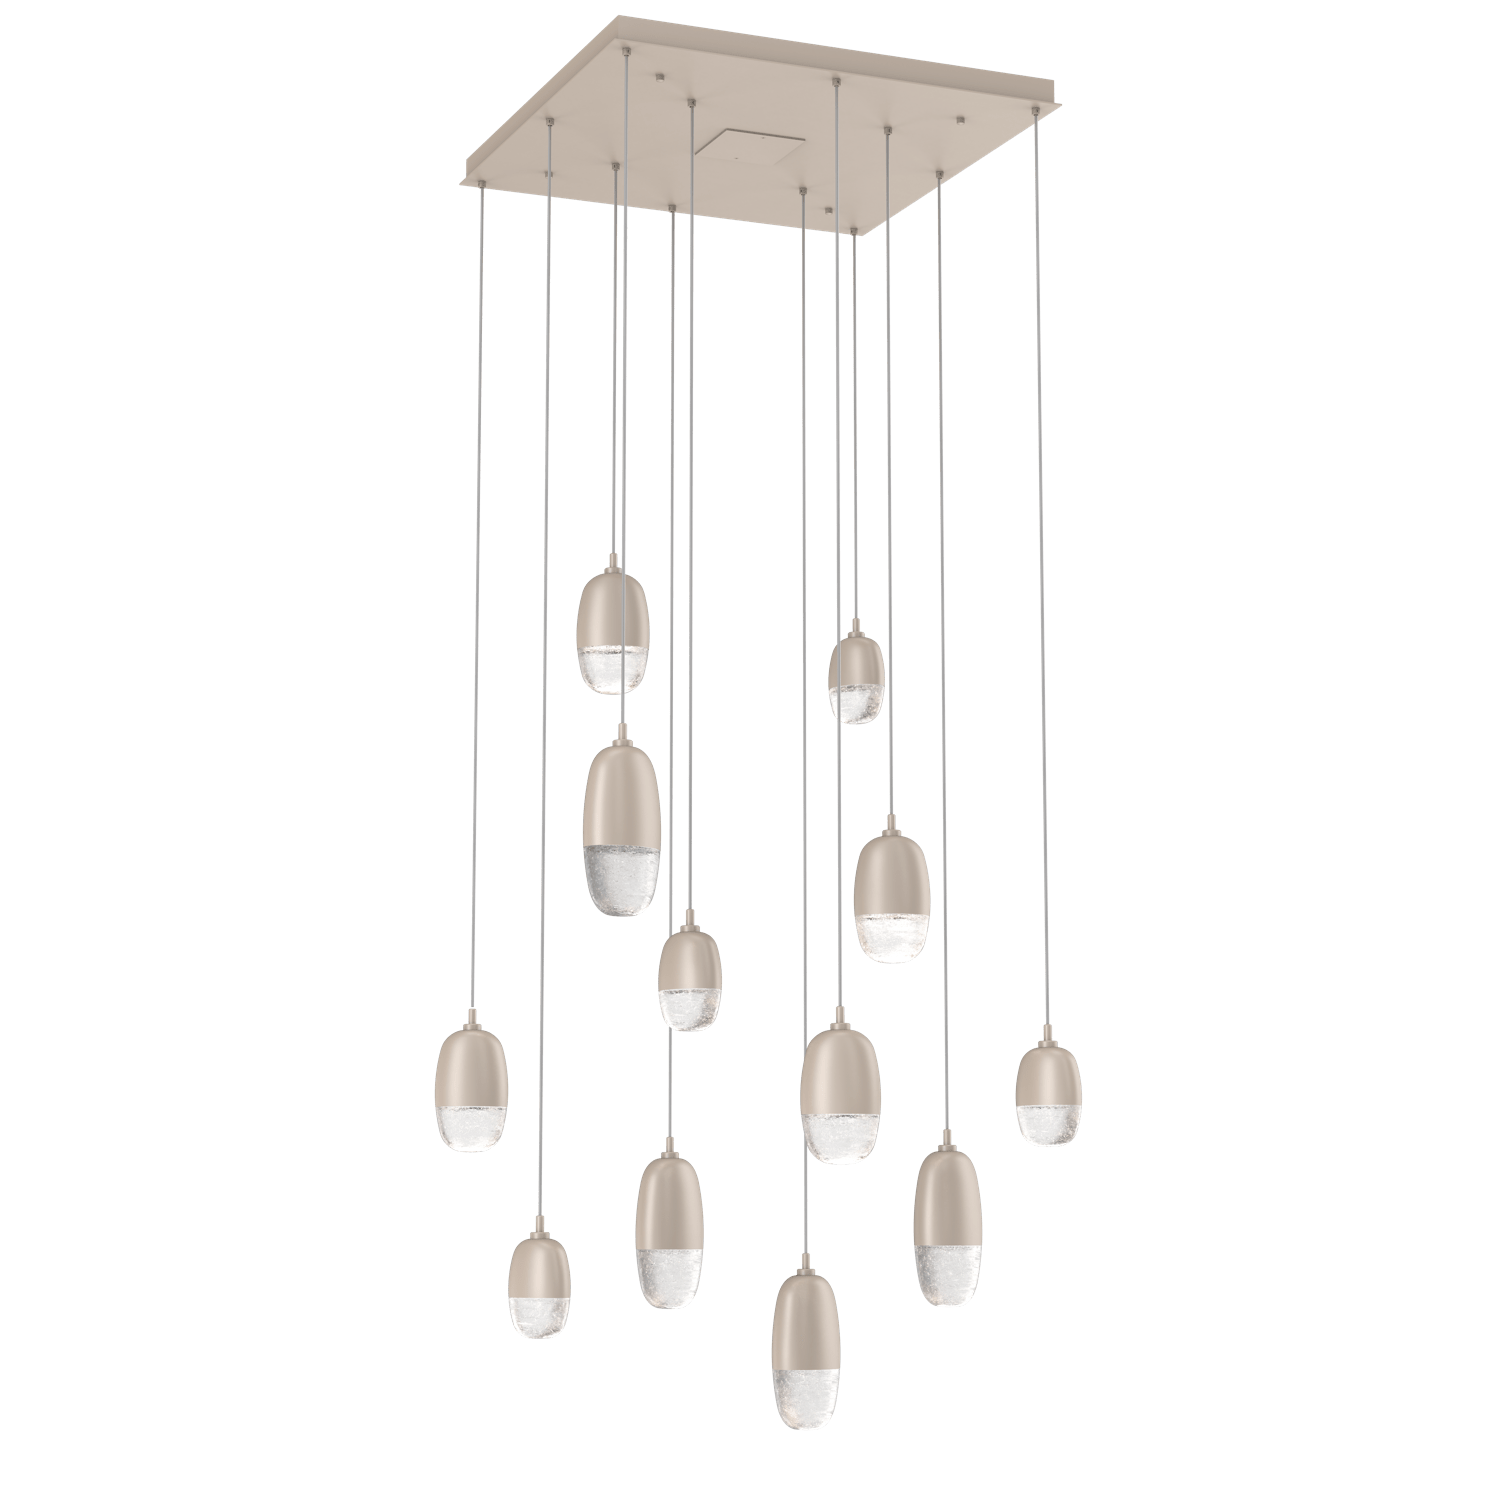 CHB0079-12-BS-Hammerton-Studio-Pebble-12-light-square-pendant-chandelier-with-metallic-beige-silver-finish-and-clear-cast-glass-shades-and-LED-lamping